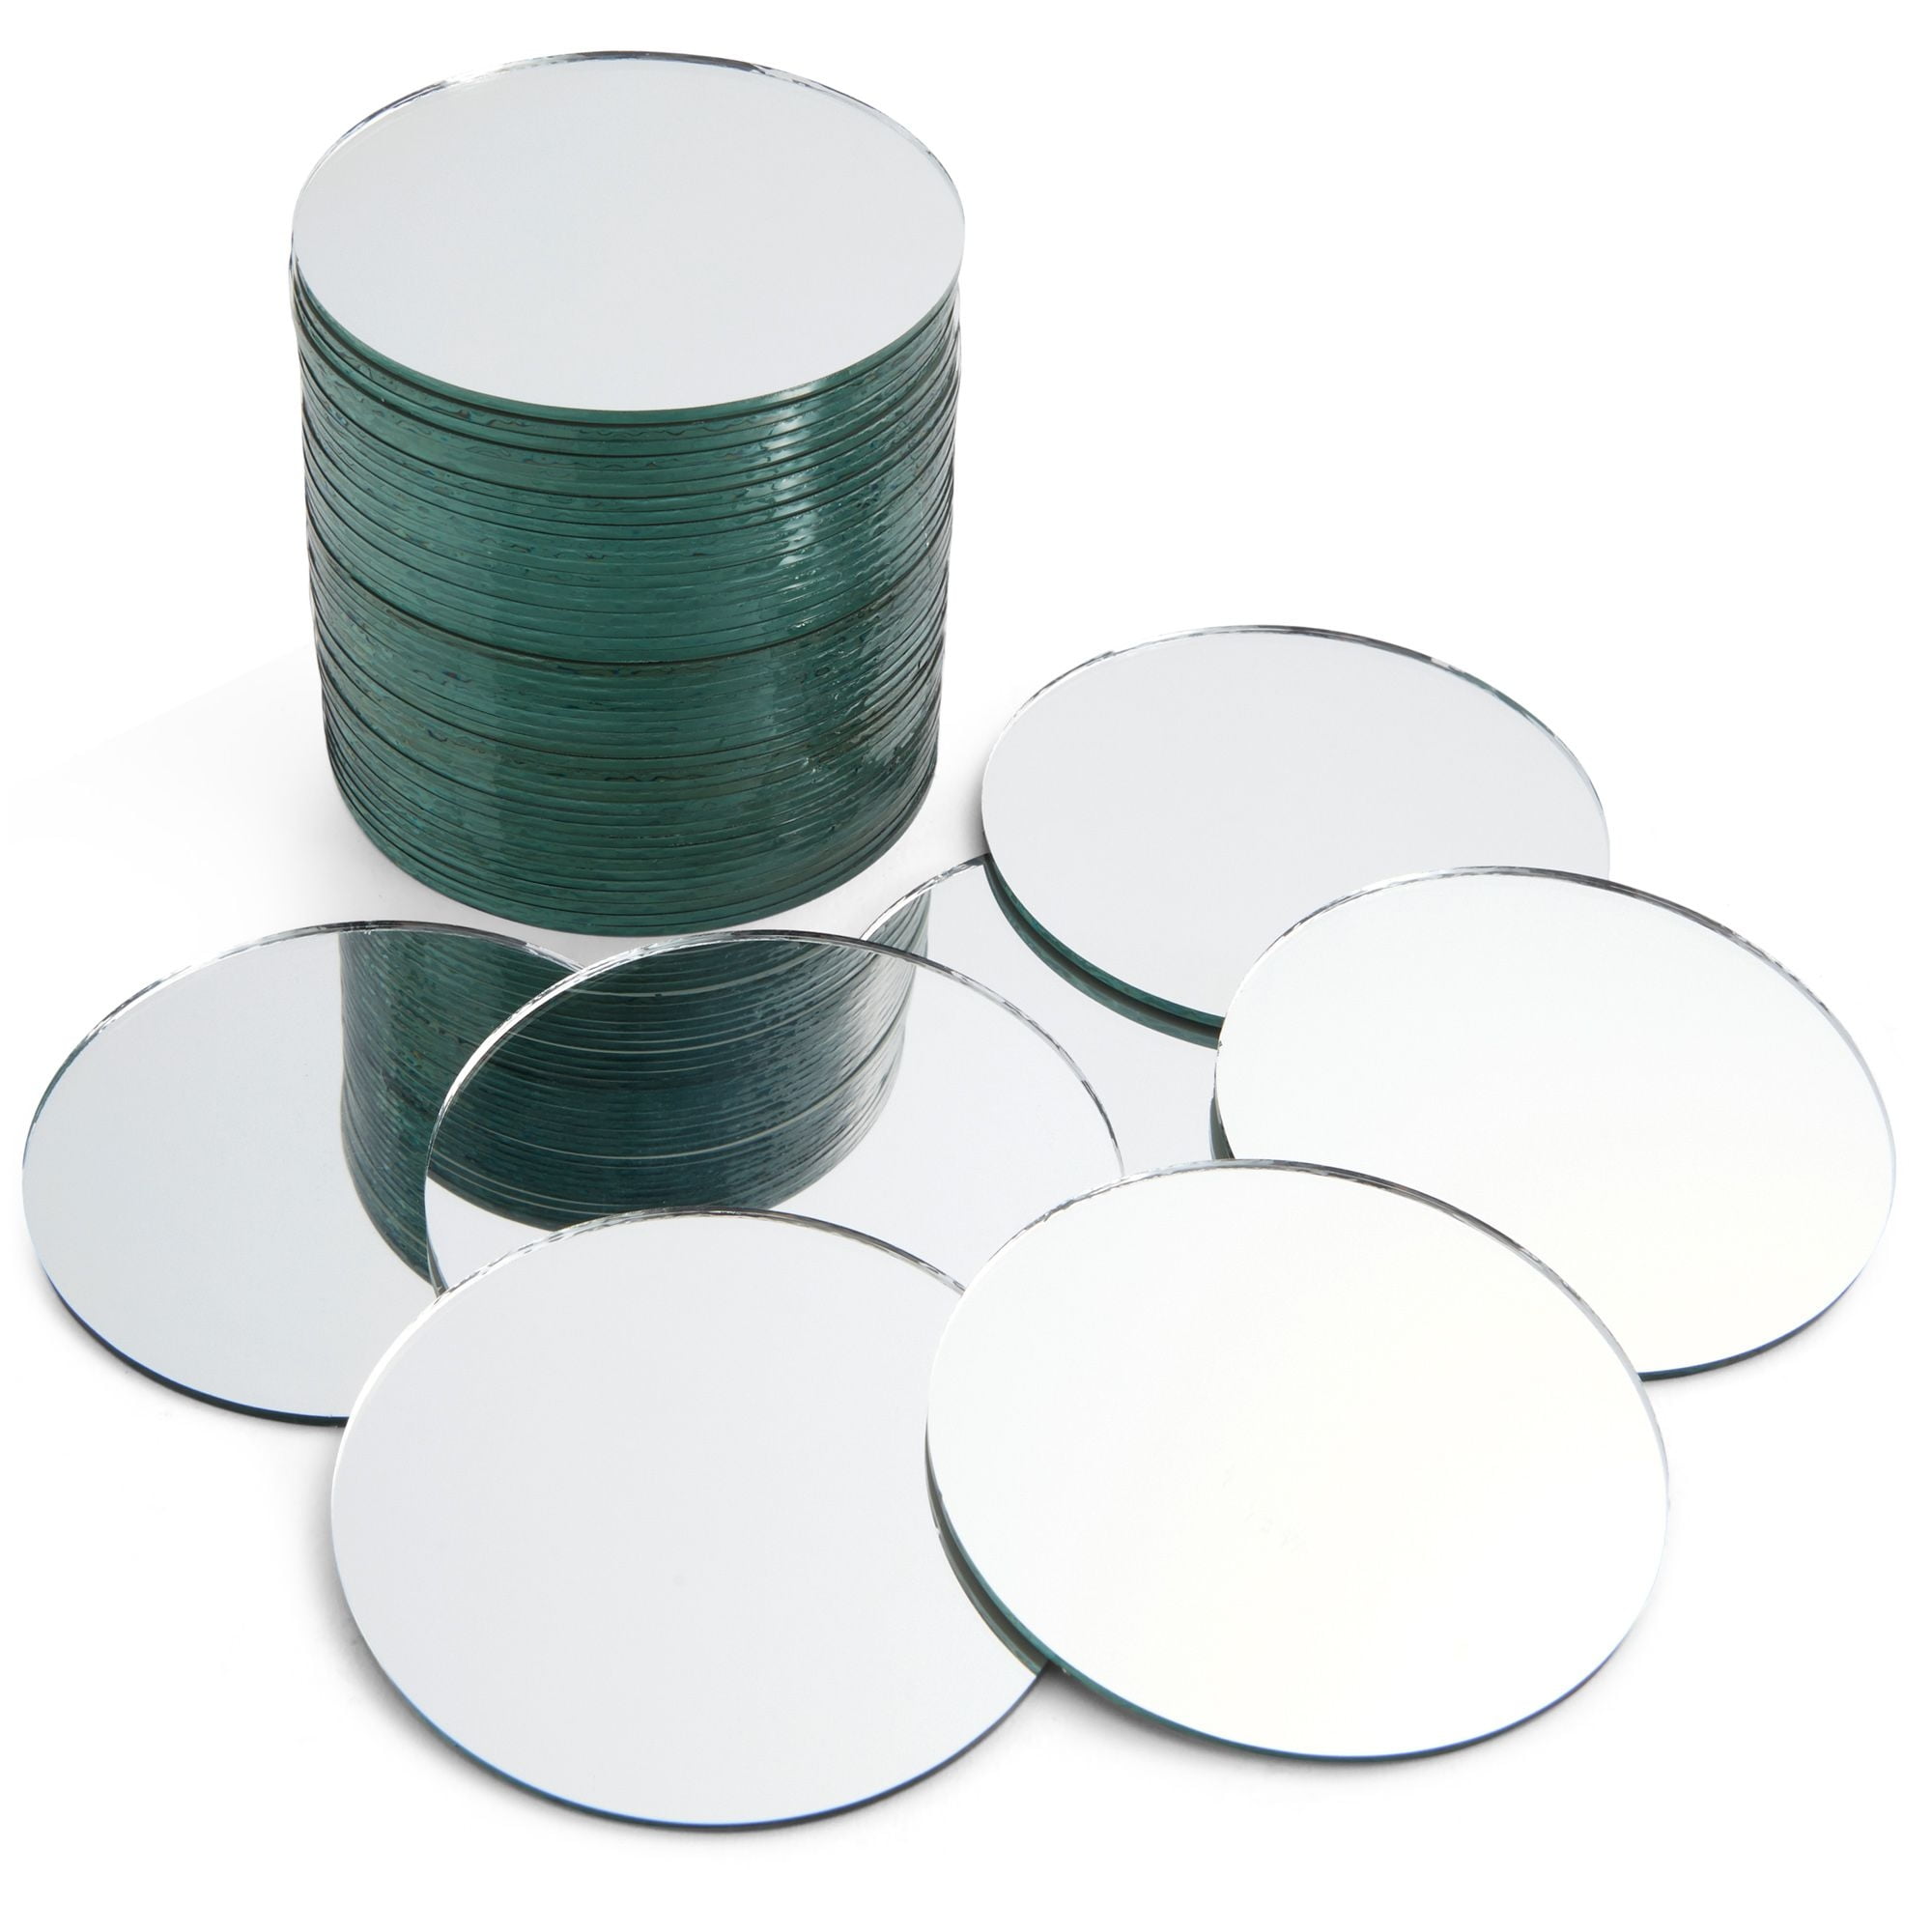 50-Pack of Small Round Mirrors for Crafts, 3-Inch Glass Tile Circles for  Wall and Table Decor, Mosaics, DIY Home Projects, Decorations, Arts and  Crafts Supplies 